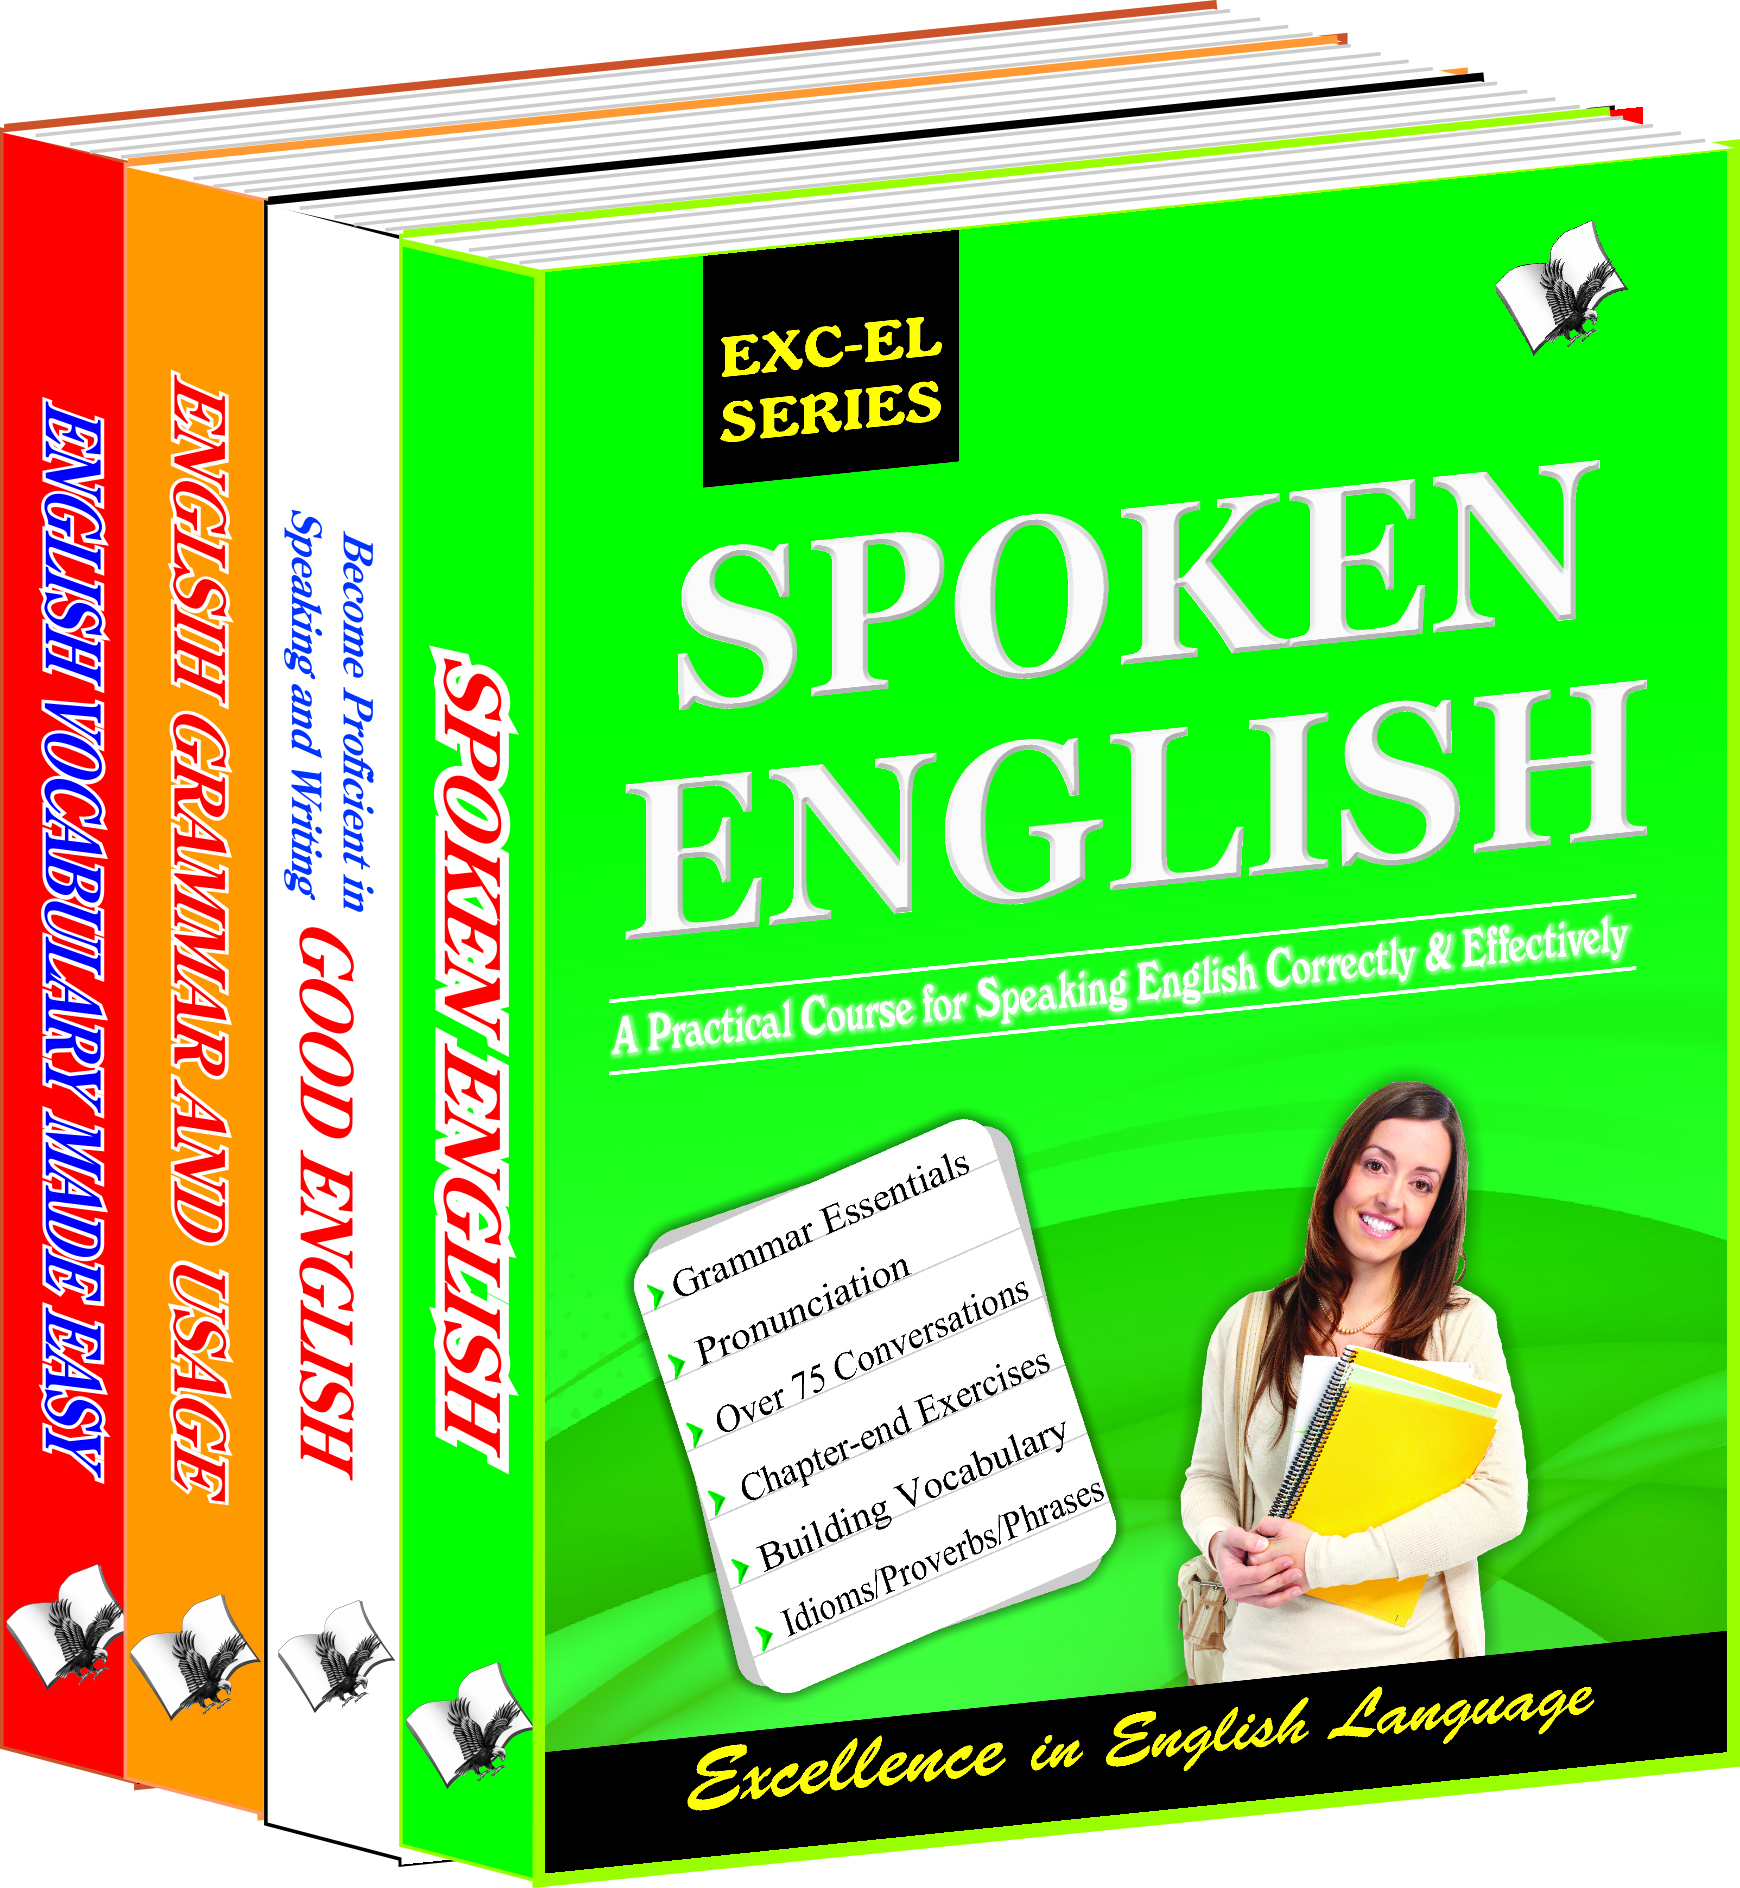 English Improvement Value Pack For Students-Guide to increase vocabulary, polish grammar & its usage for writing and speaking good English 